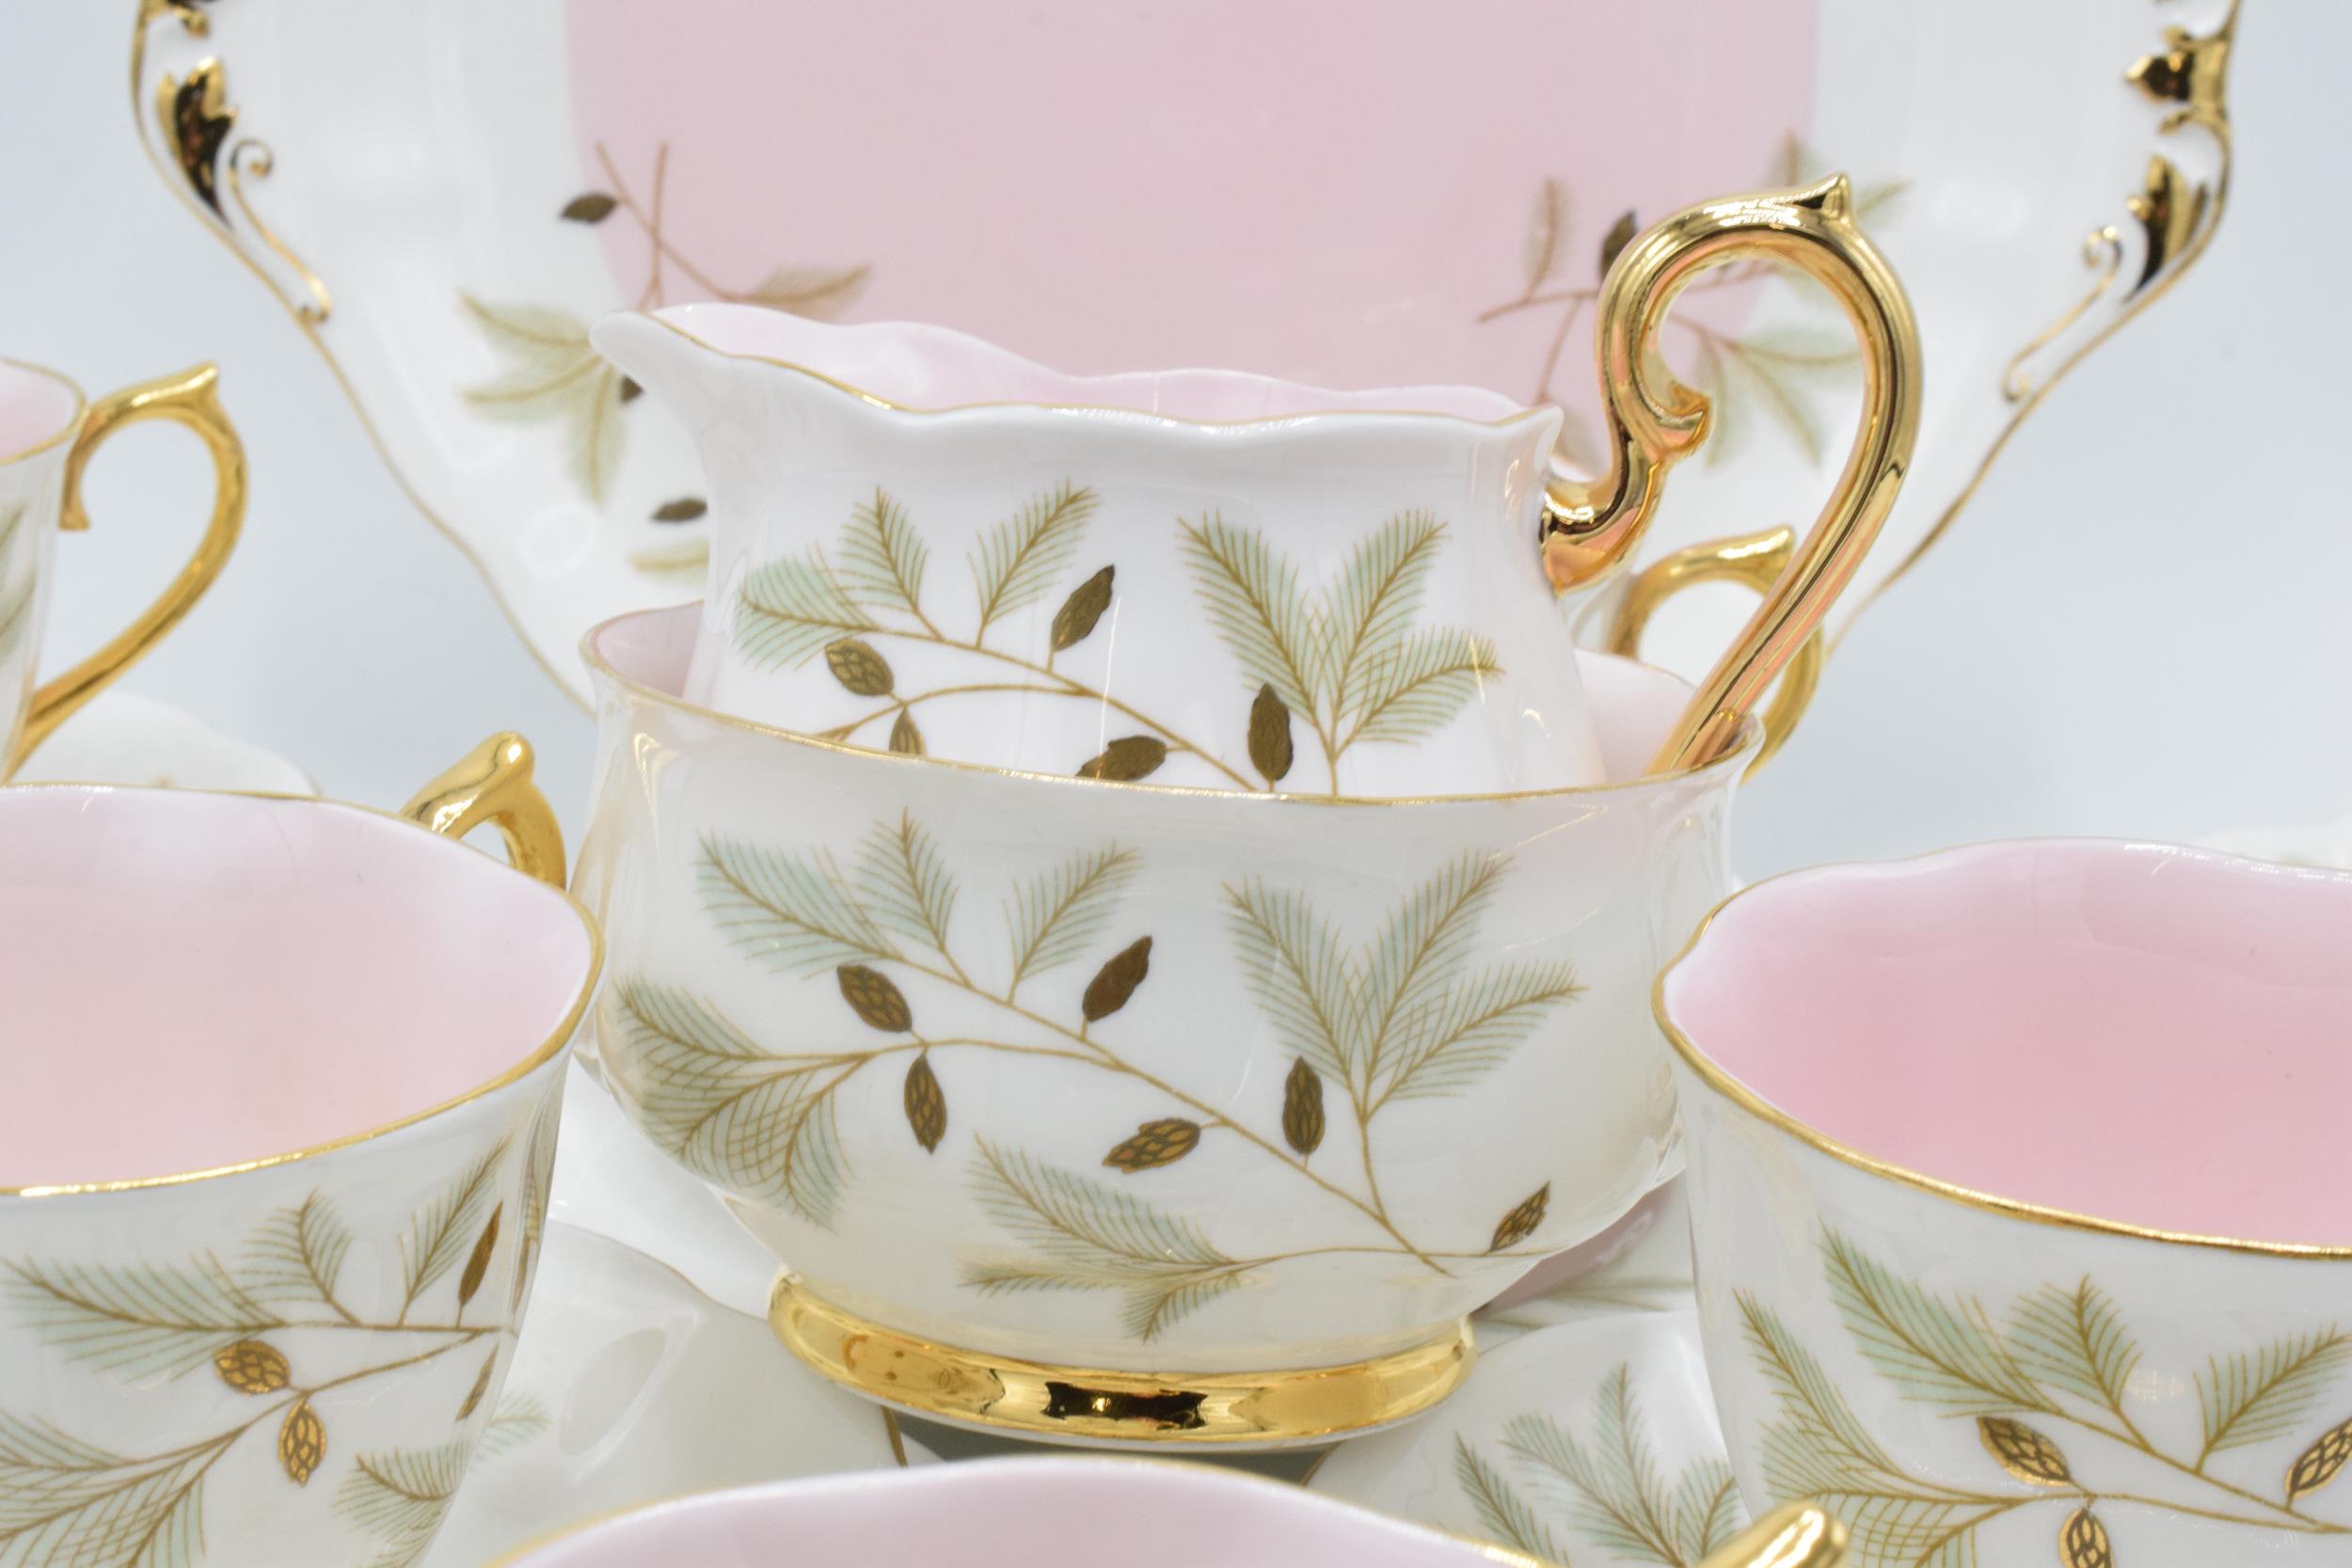 Royal Albert tea ware in the Braemar design to include 6 cups, 6 saucers, 6 side plates, a milk jug, - Image 5 of 6